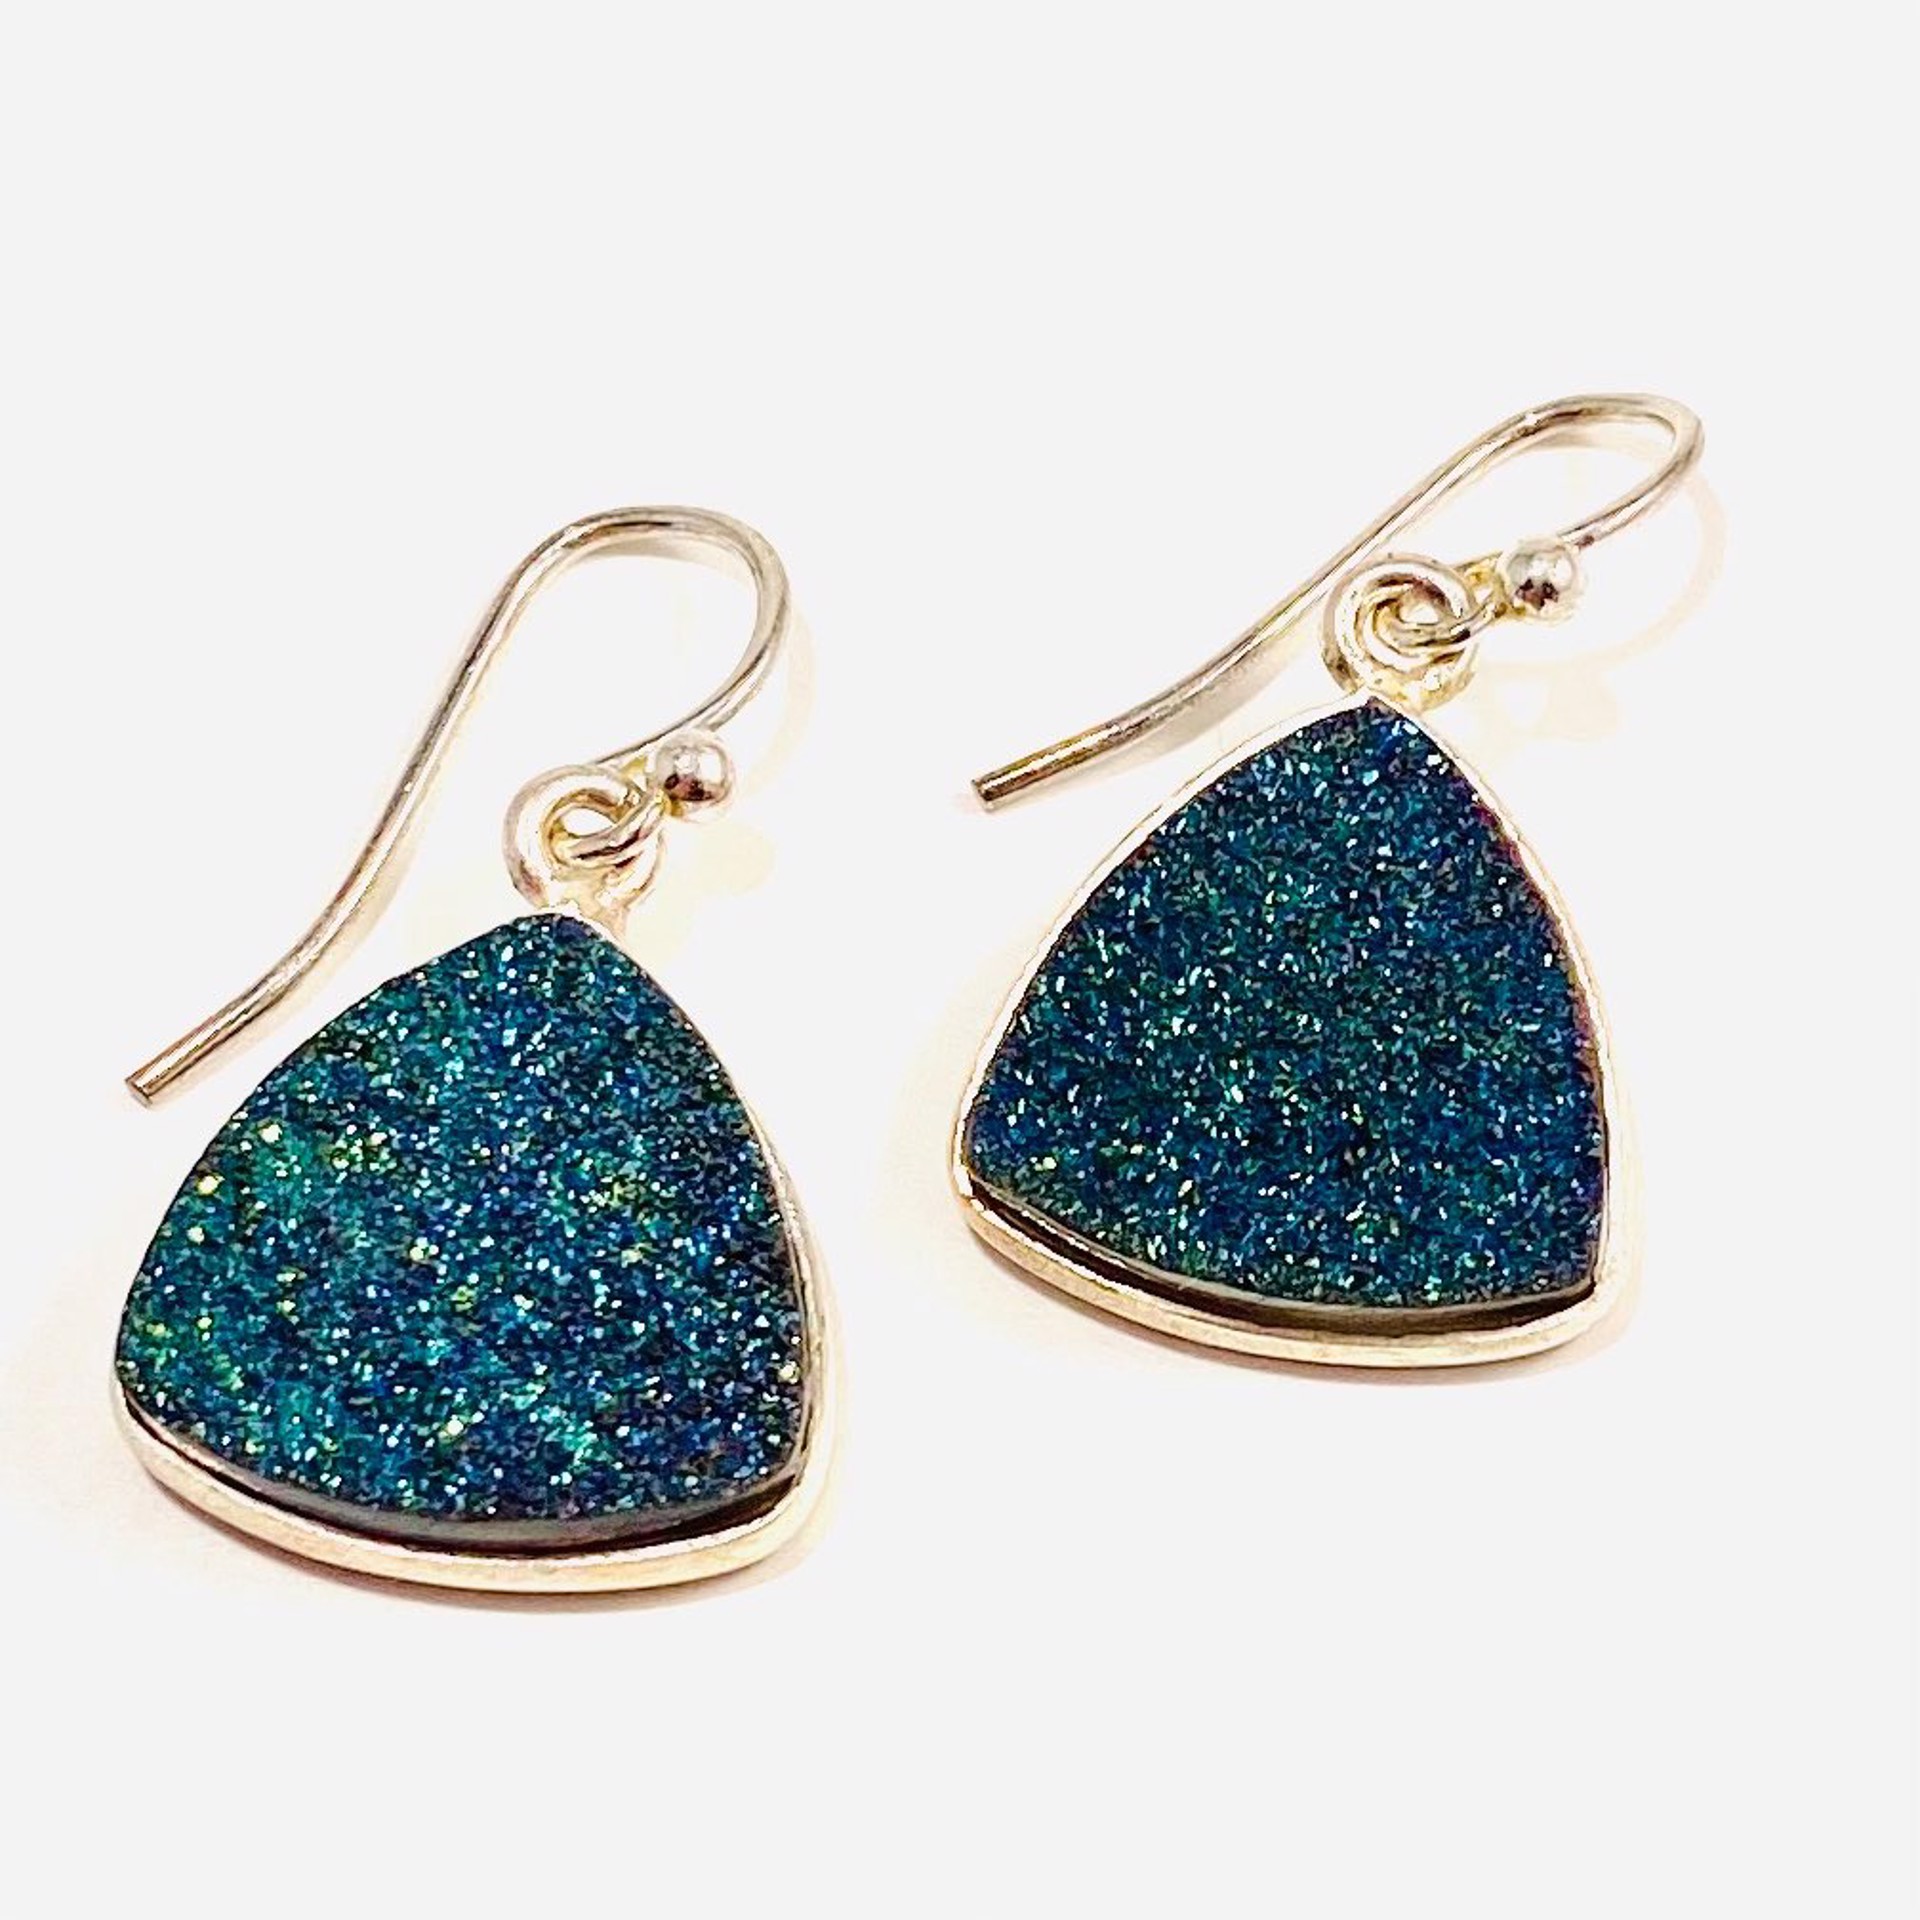 NT22-154 Large Triangle Sparkly Green Druzy Earrings by Nance Trueworthy